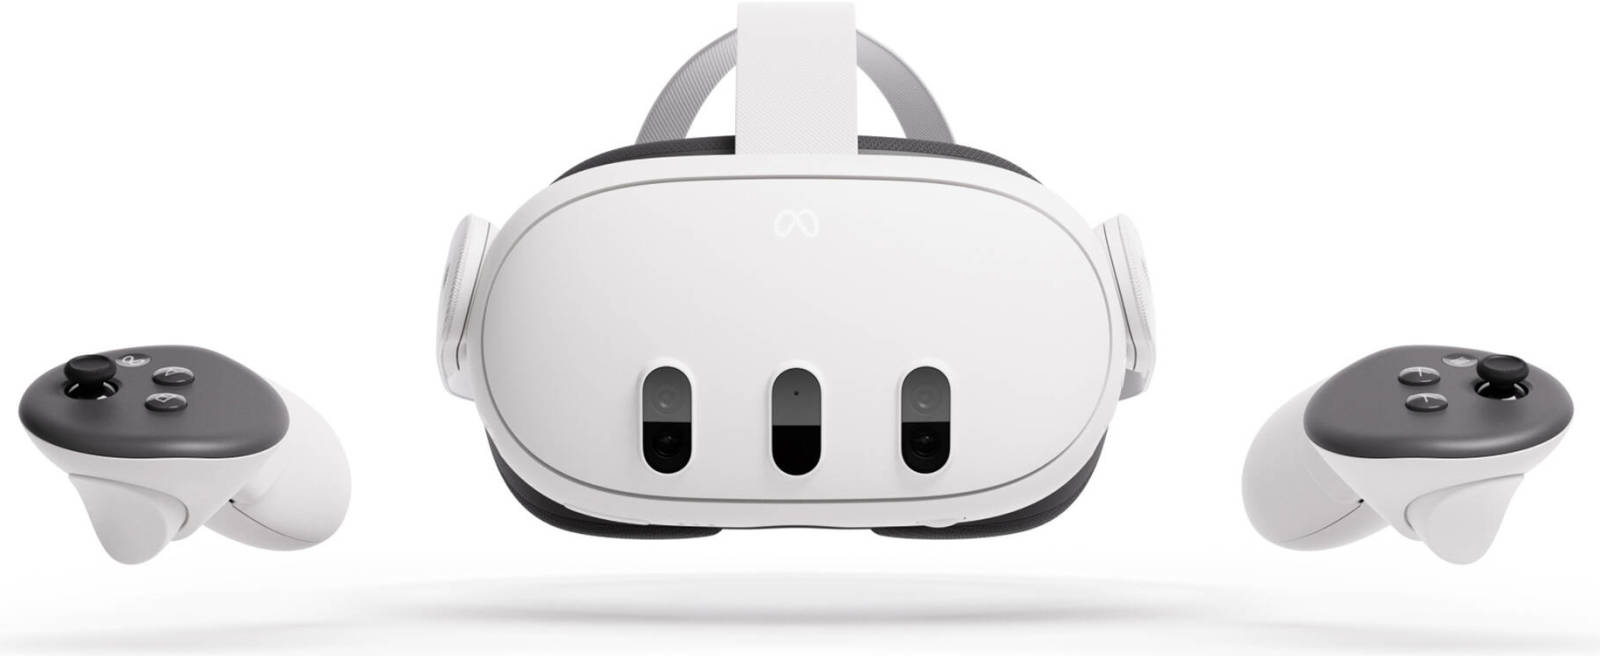 White Meta Quest 3 Advanced virtual reality headset with two black controllers in front of it.